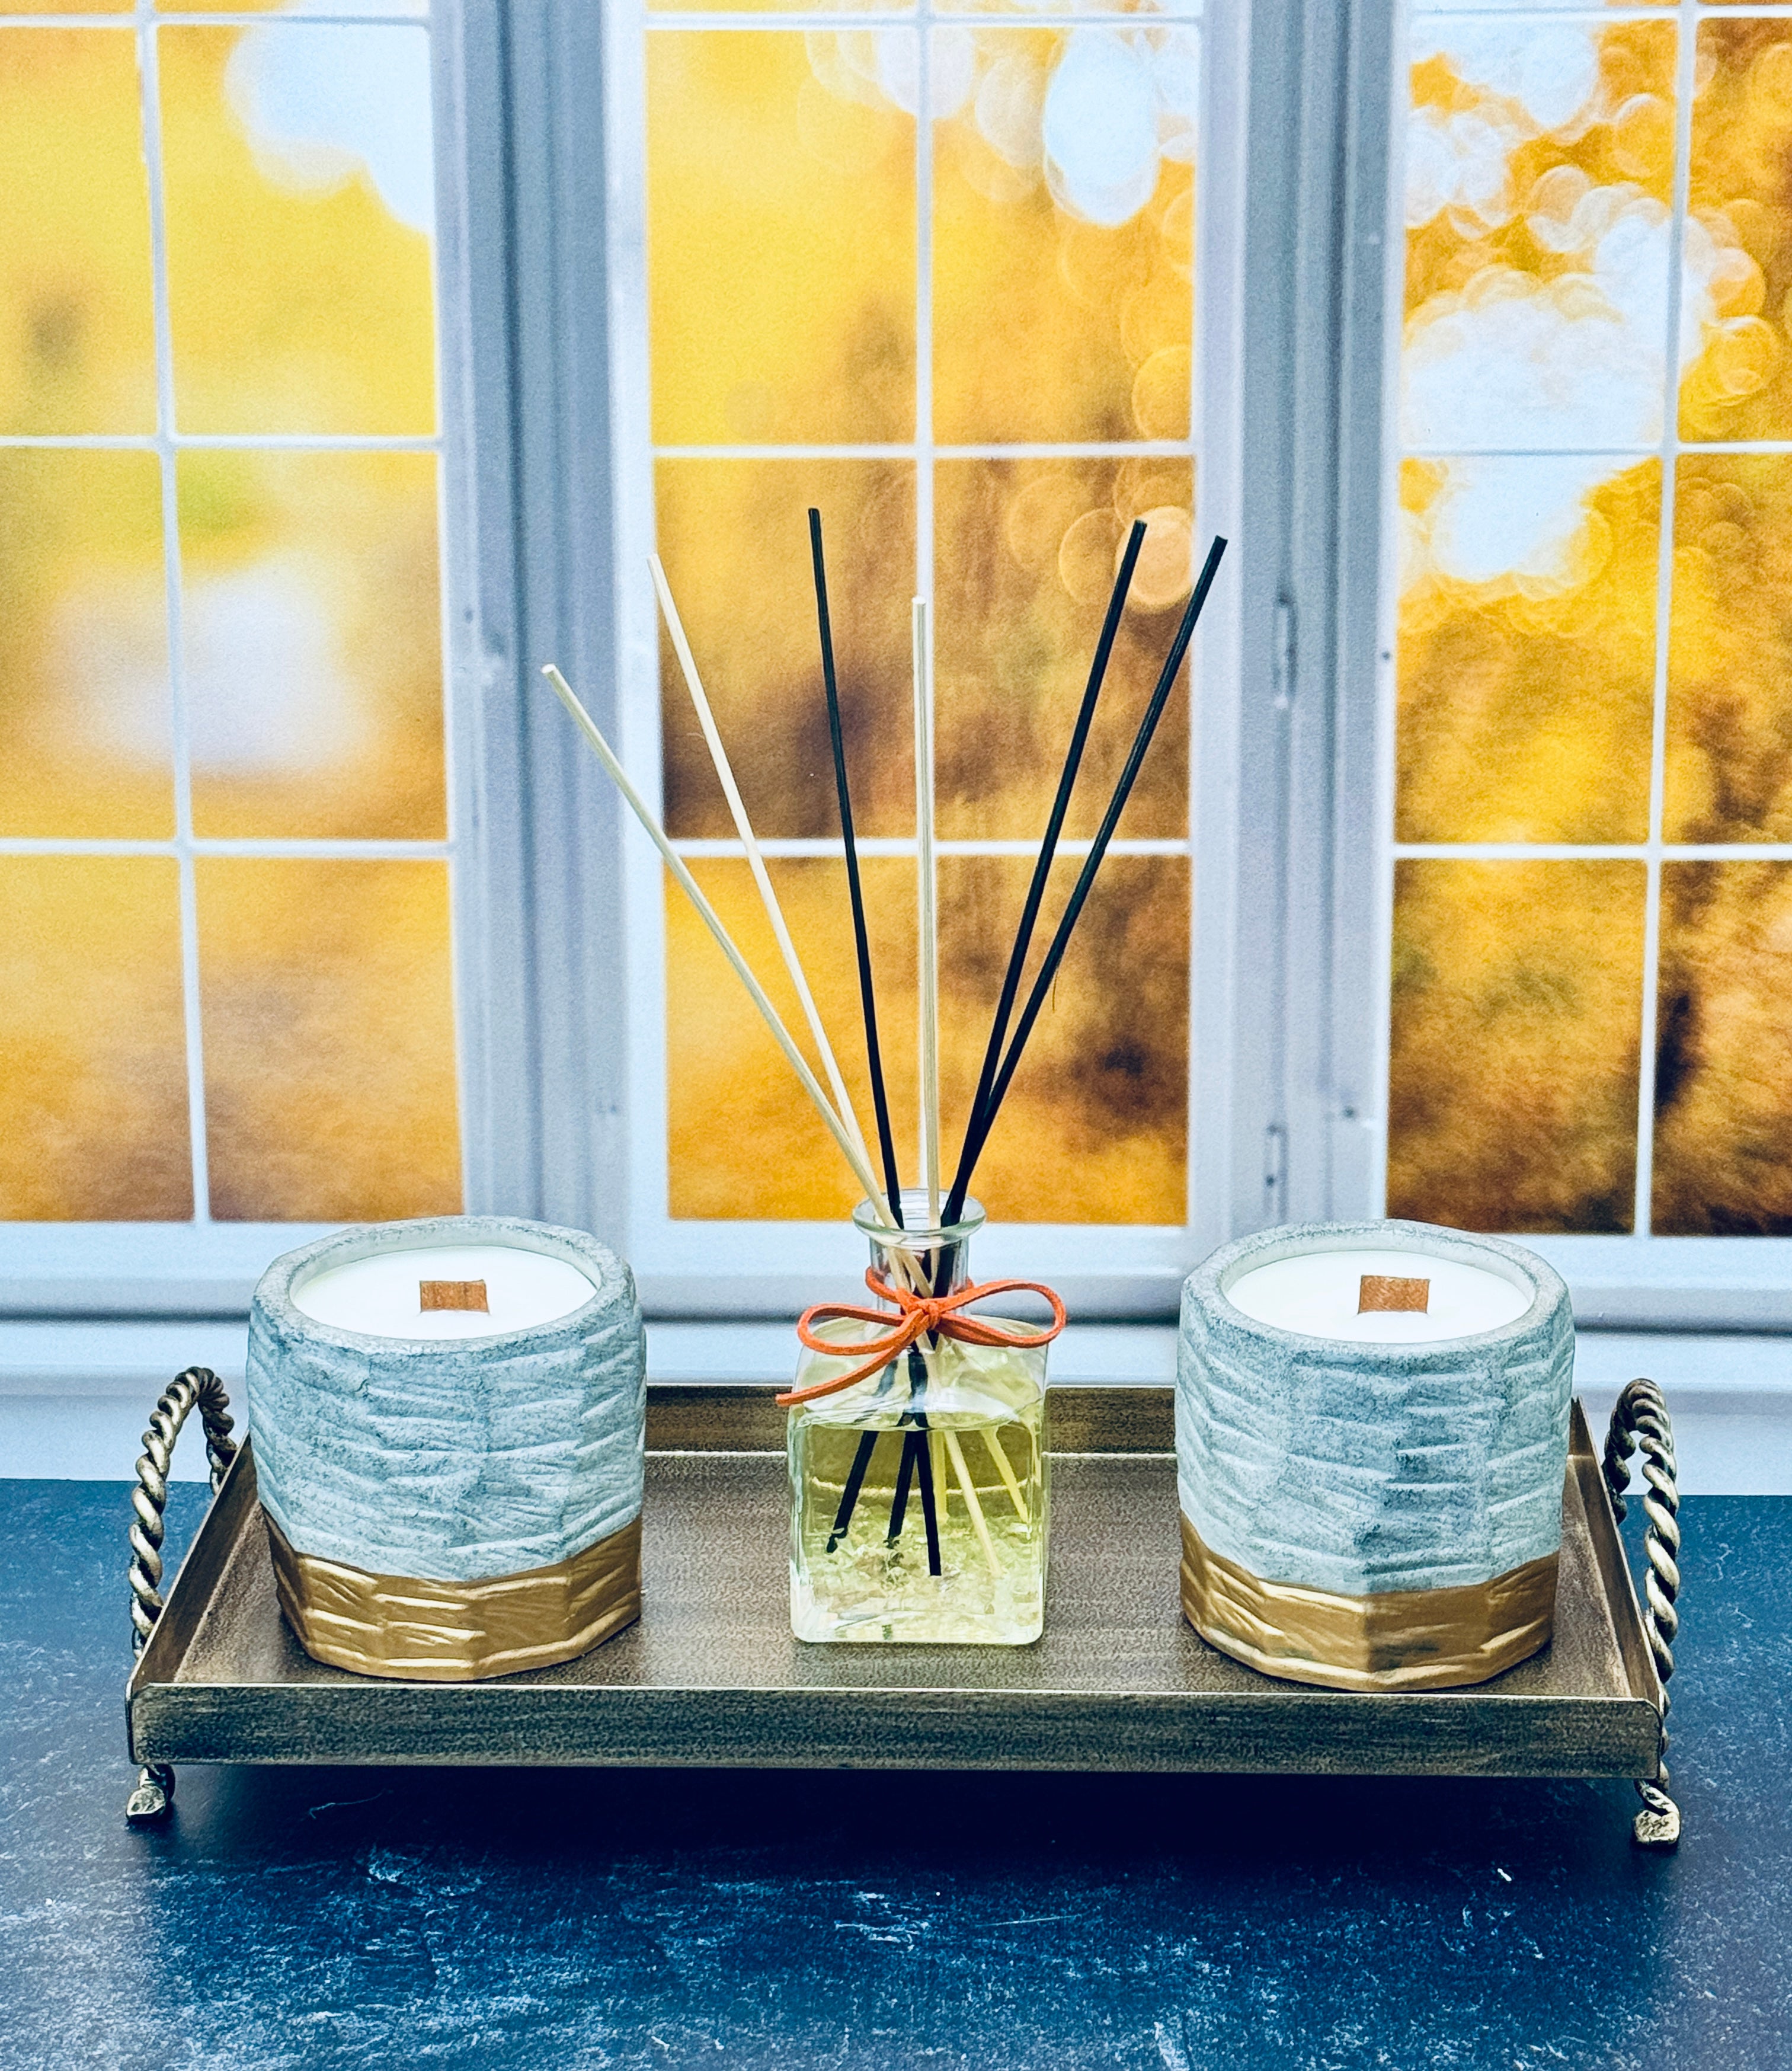 Golden Glow Stone Candle Duo with Ginger Peach Reed Diffuser Tray Set